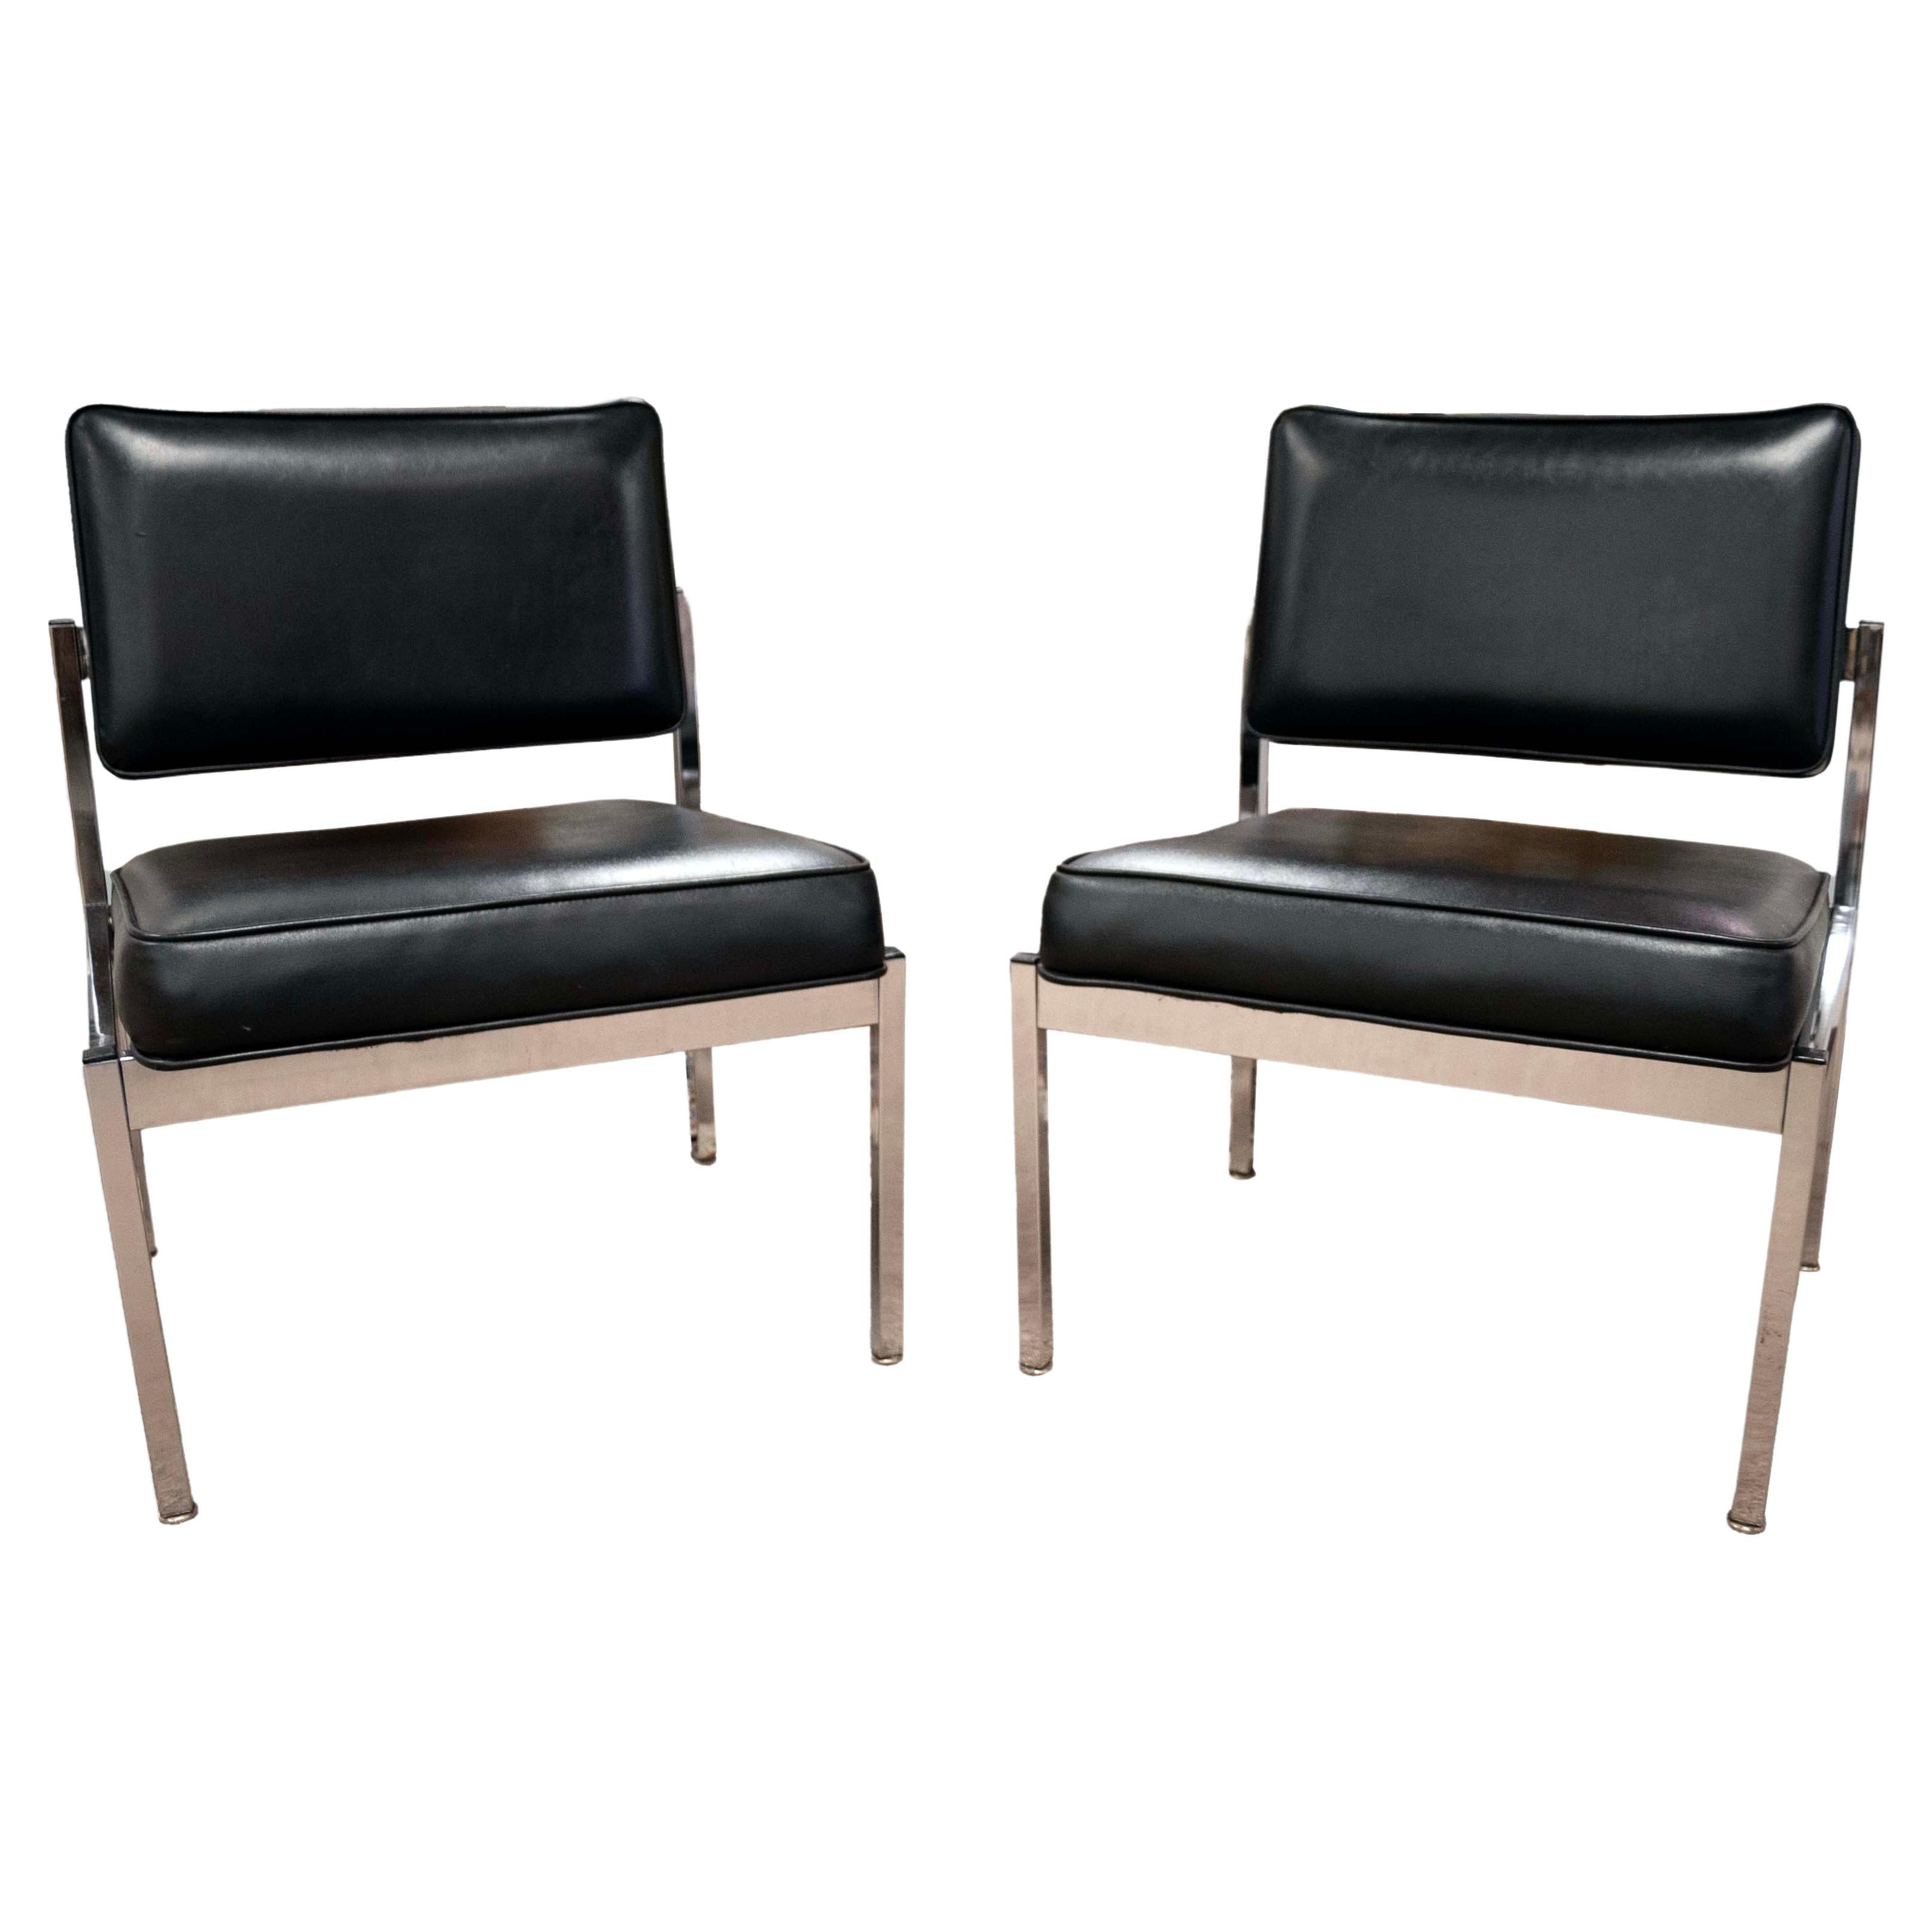 Pair of Florence Knoll Slipper Chairs in Black Leather Brushed Stainless Steel